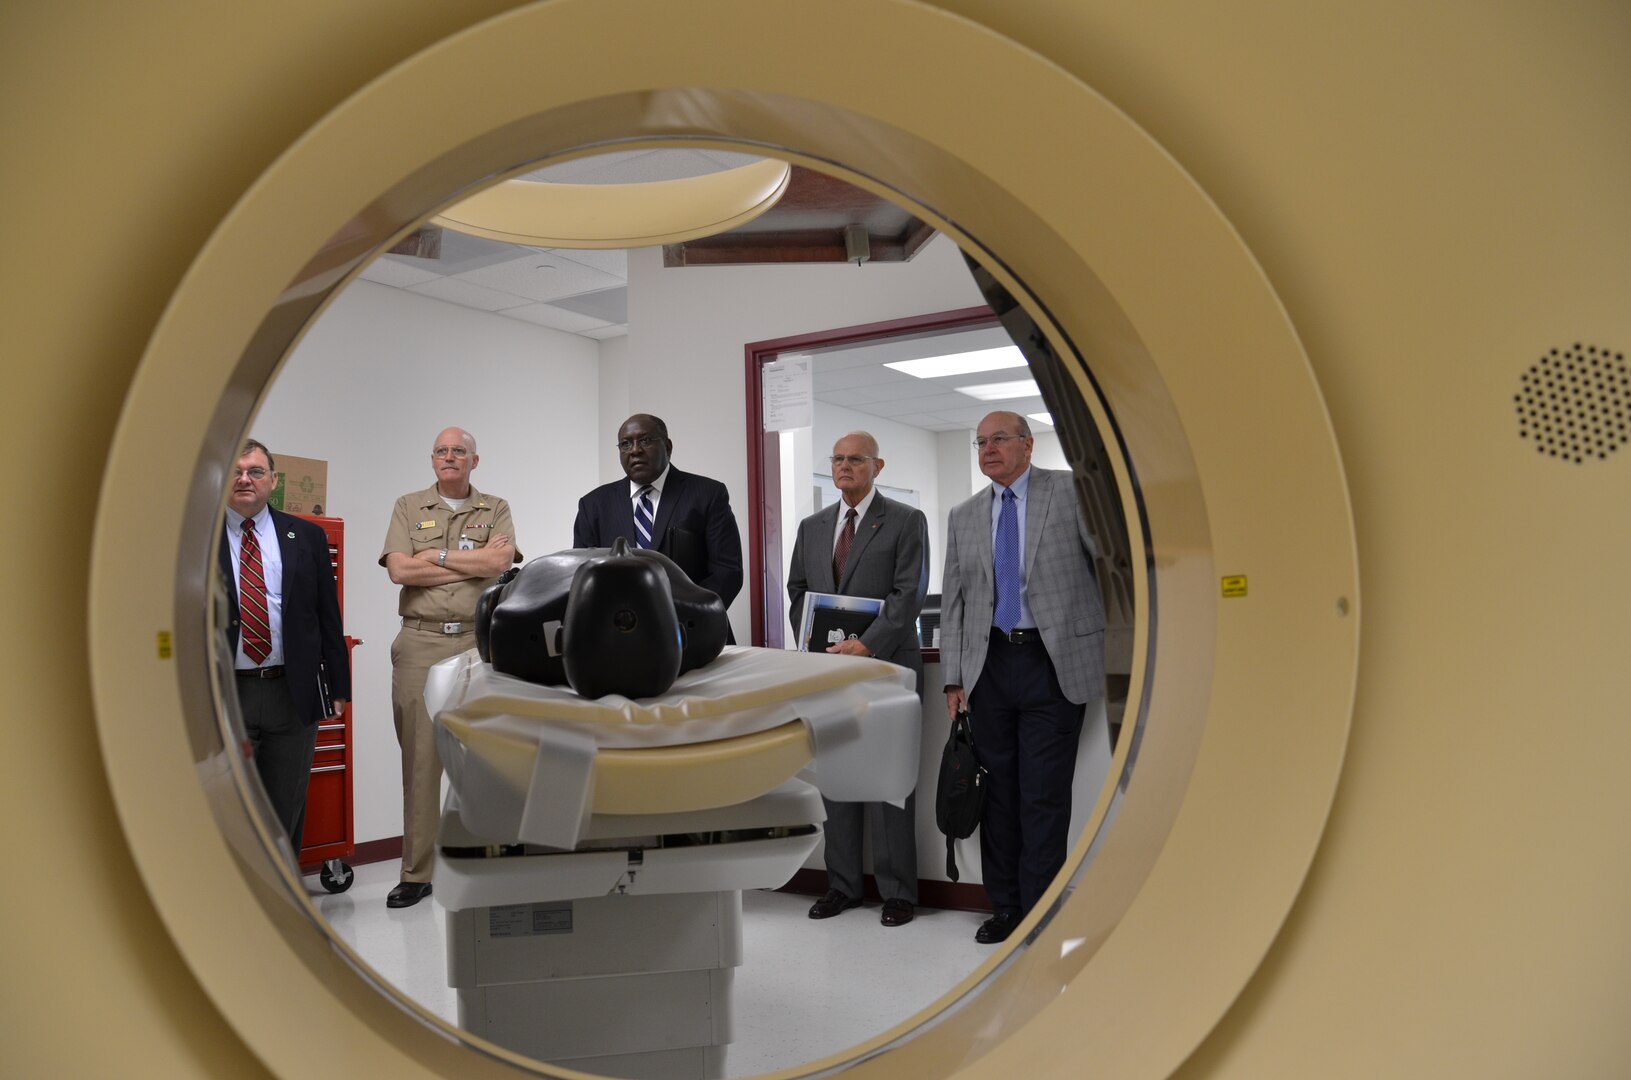 Rear Adm. Bob Kiser, Commandant, Medical Education & Training Campus, accompanies members of the Community College of the Air Force and subcommittee members from the Air University Board of Visitors during a tour of the radiology technician program. Radiology Tech is one of 64 programs taught at the Medical
Education & Training Campus (METC), a tri-service school established under the Base Realignment and Closure Commission (BRAC) to produce the world's finest Medics, Corpsmen, and Techs, supporting our Nation's ability to engage globally. (U.S. Navy photo by Dewite R. Wehrman/Released)
